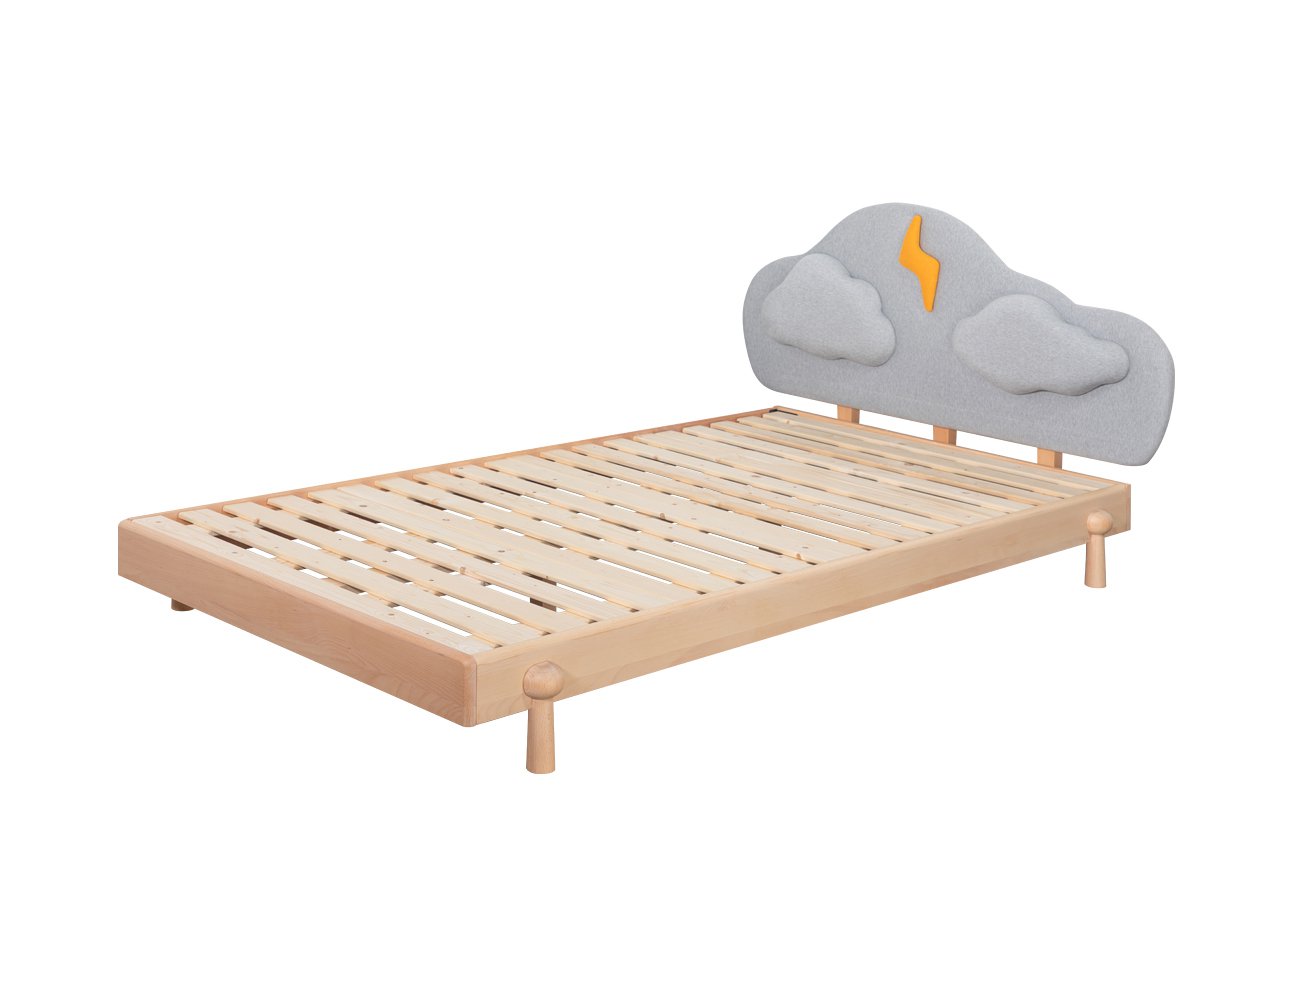 Cloud King Single Bed Frame @ Crazy Sales - We have the best daily